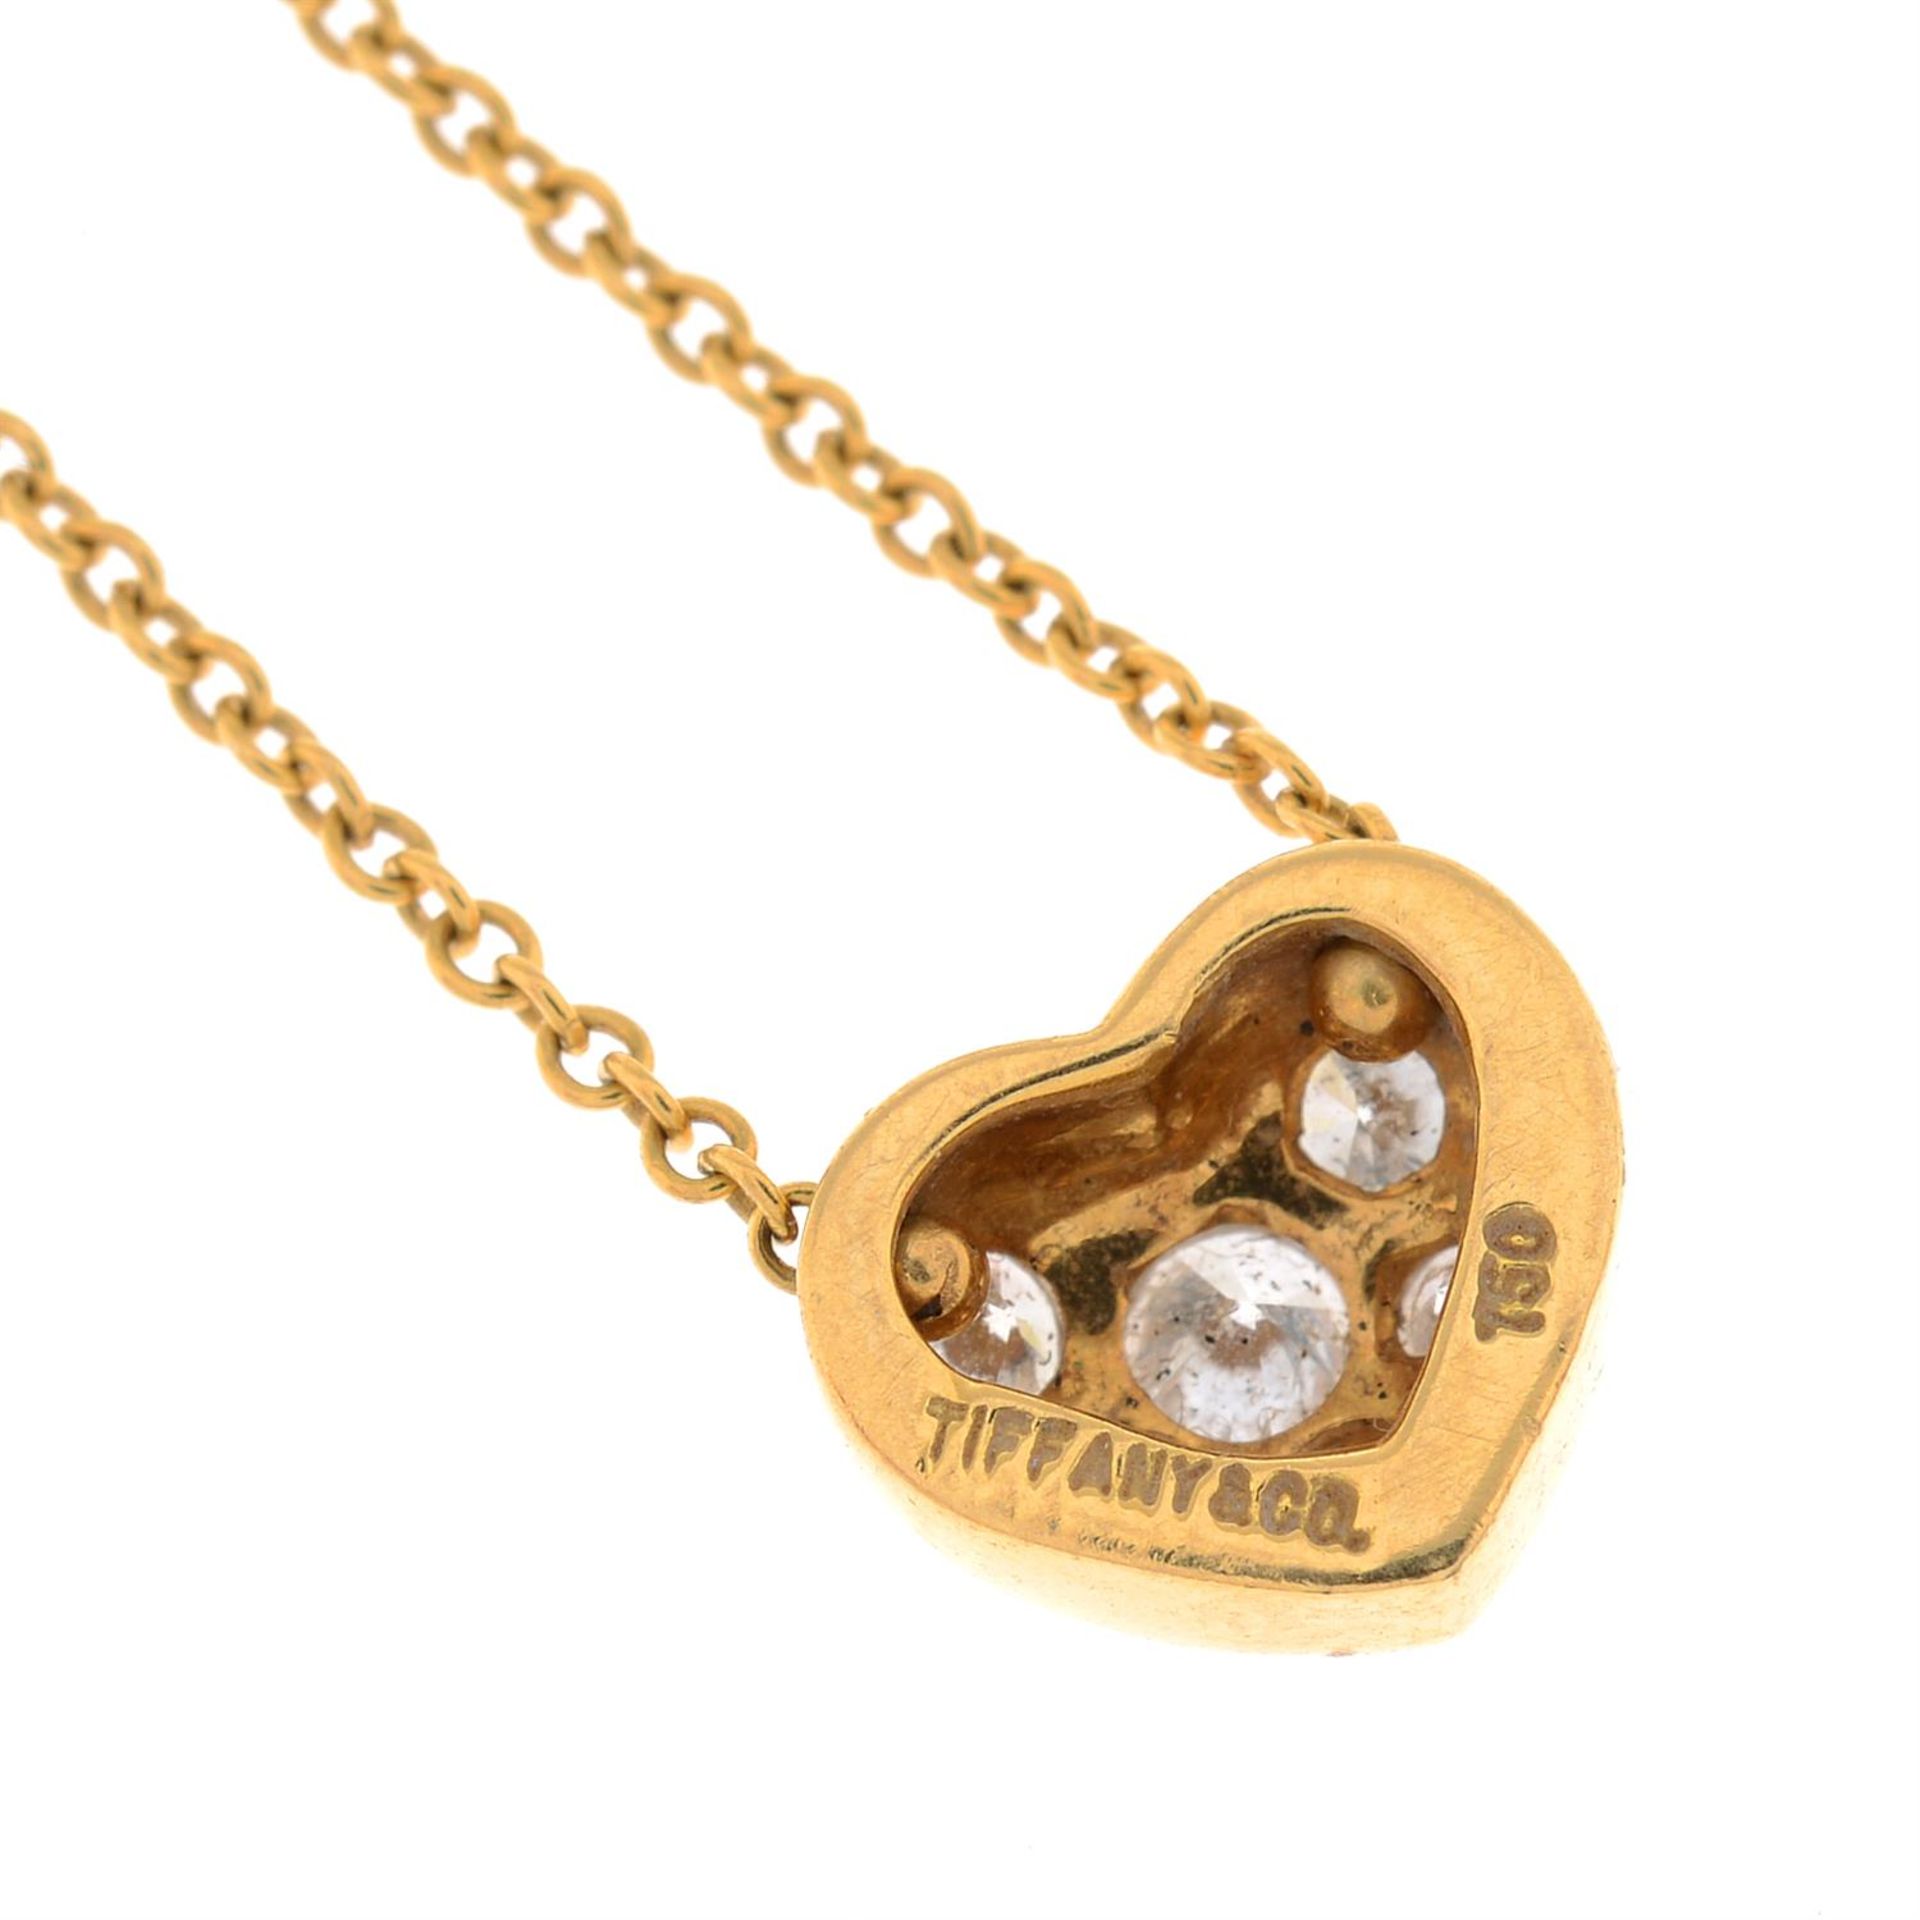 A brilliant-cut diamond heart pendant, on an integral trace-link chain, by Tiffany & Co. - Image 2 of 4